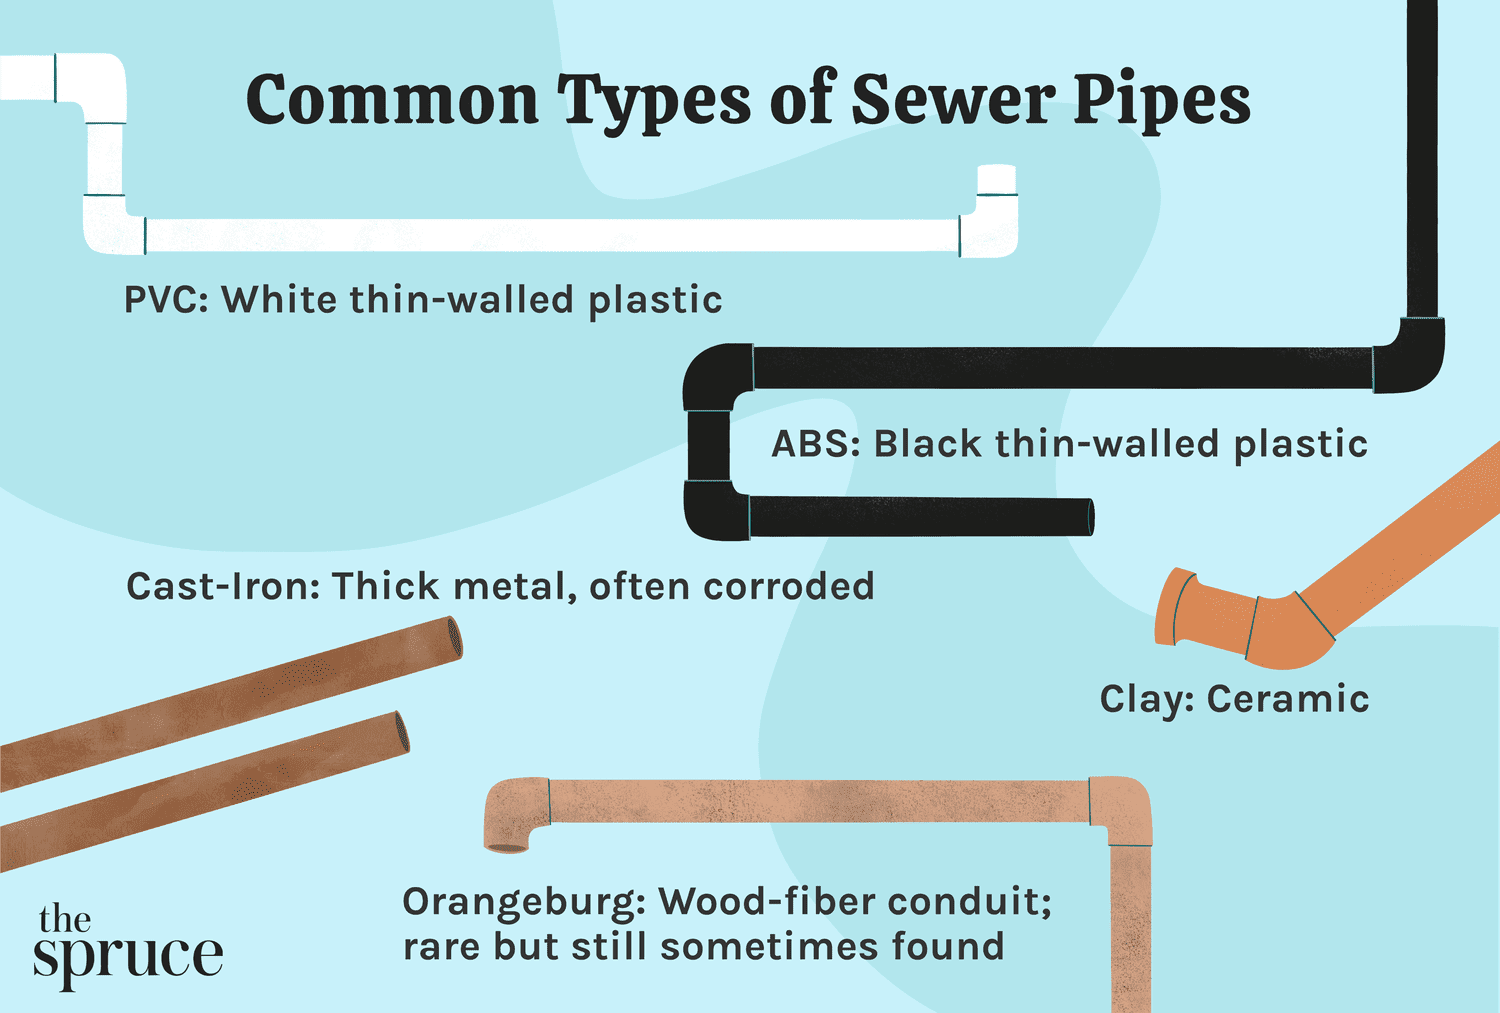 How to Repair Pvc Sewer Pipe in the Ground